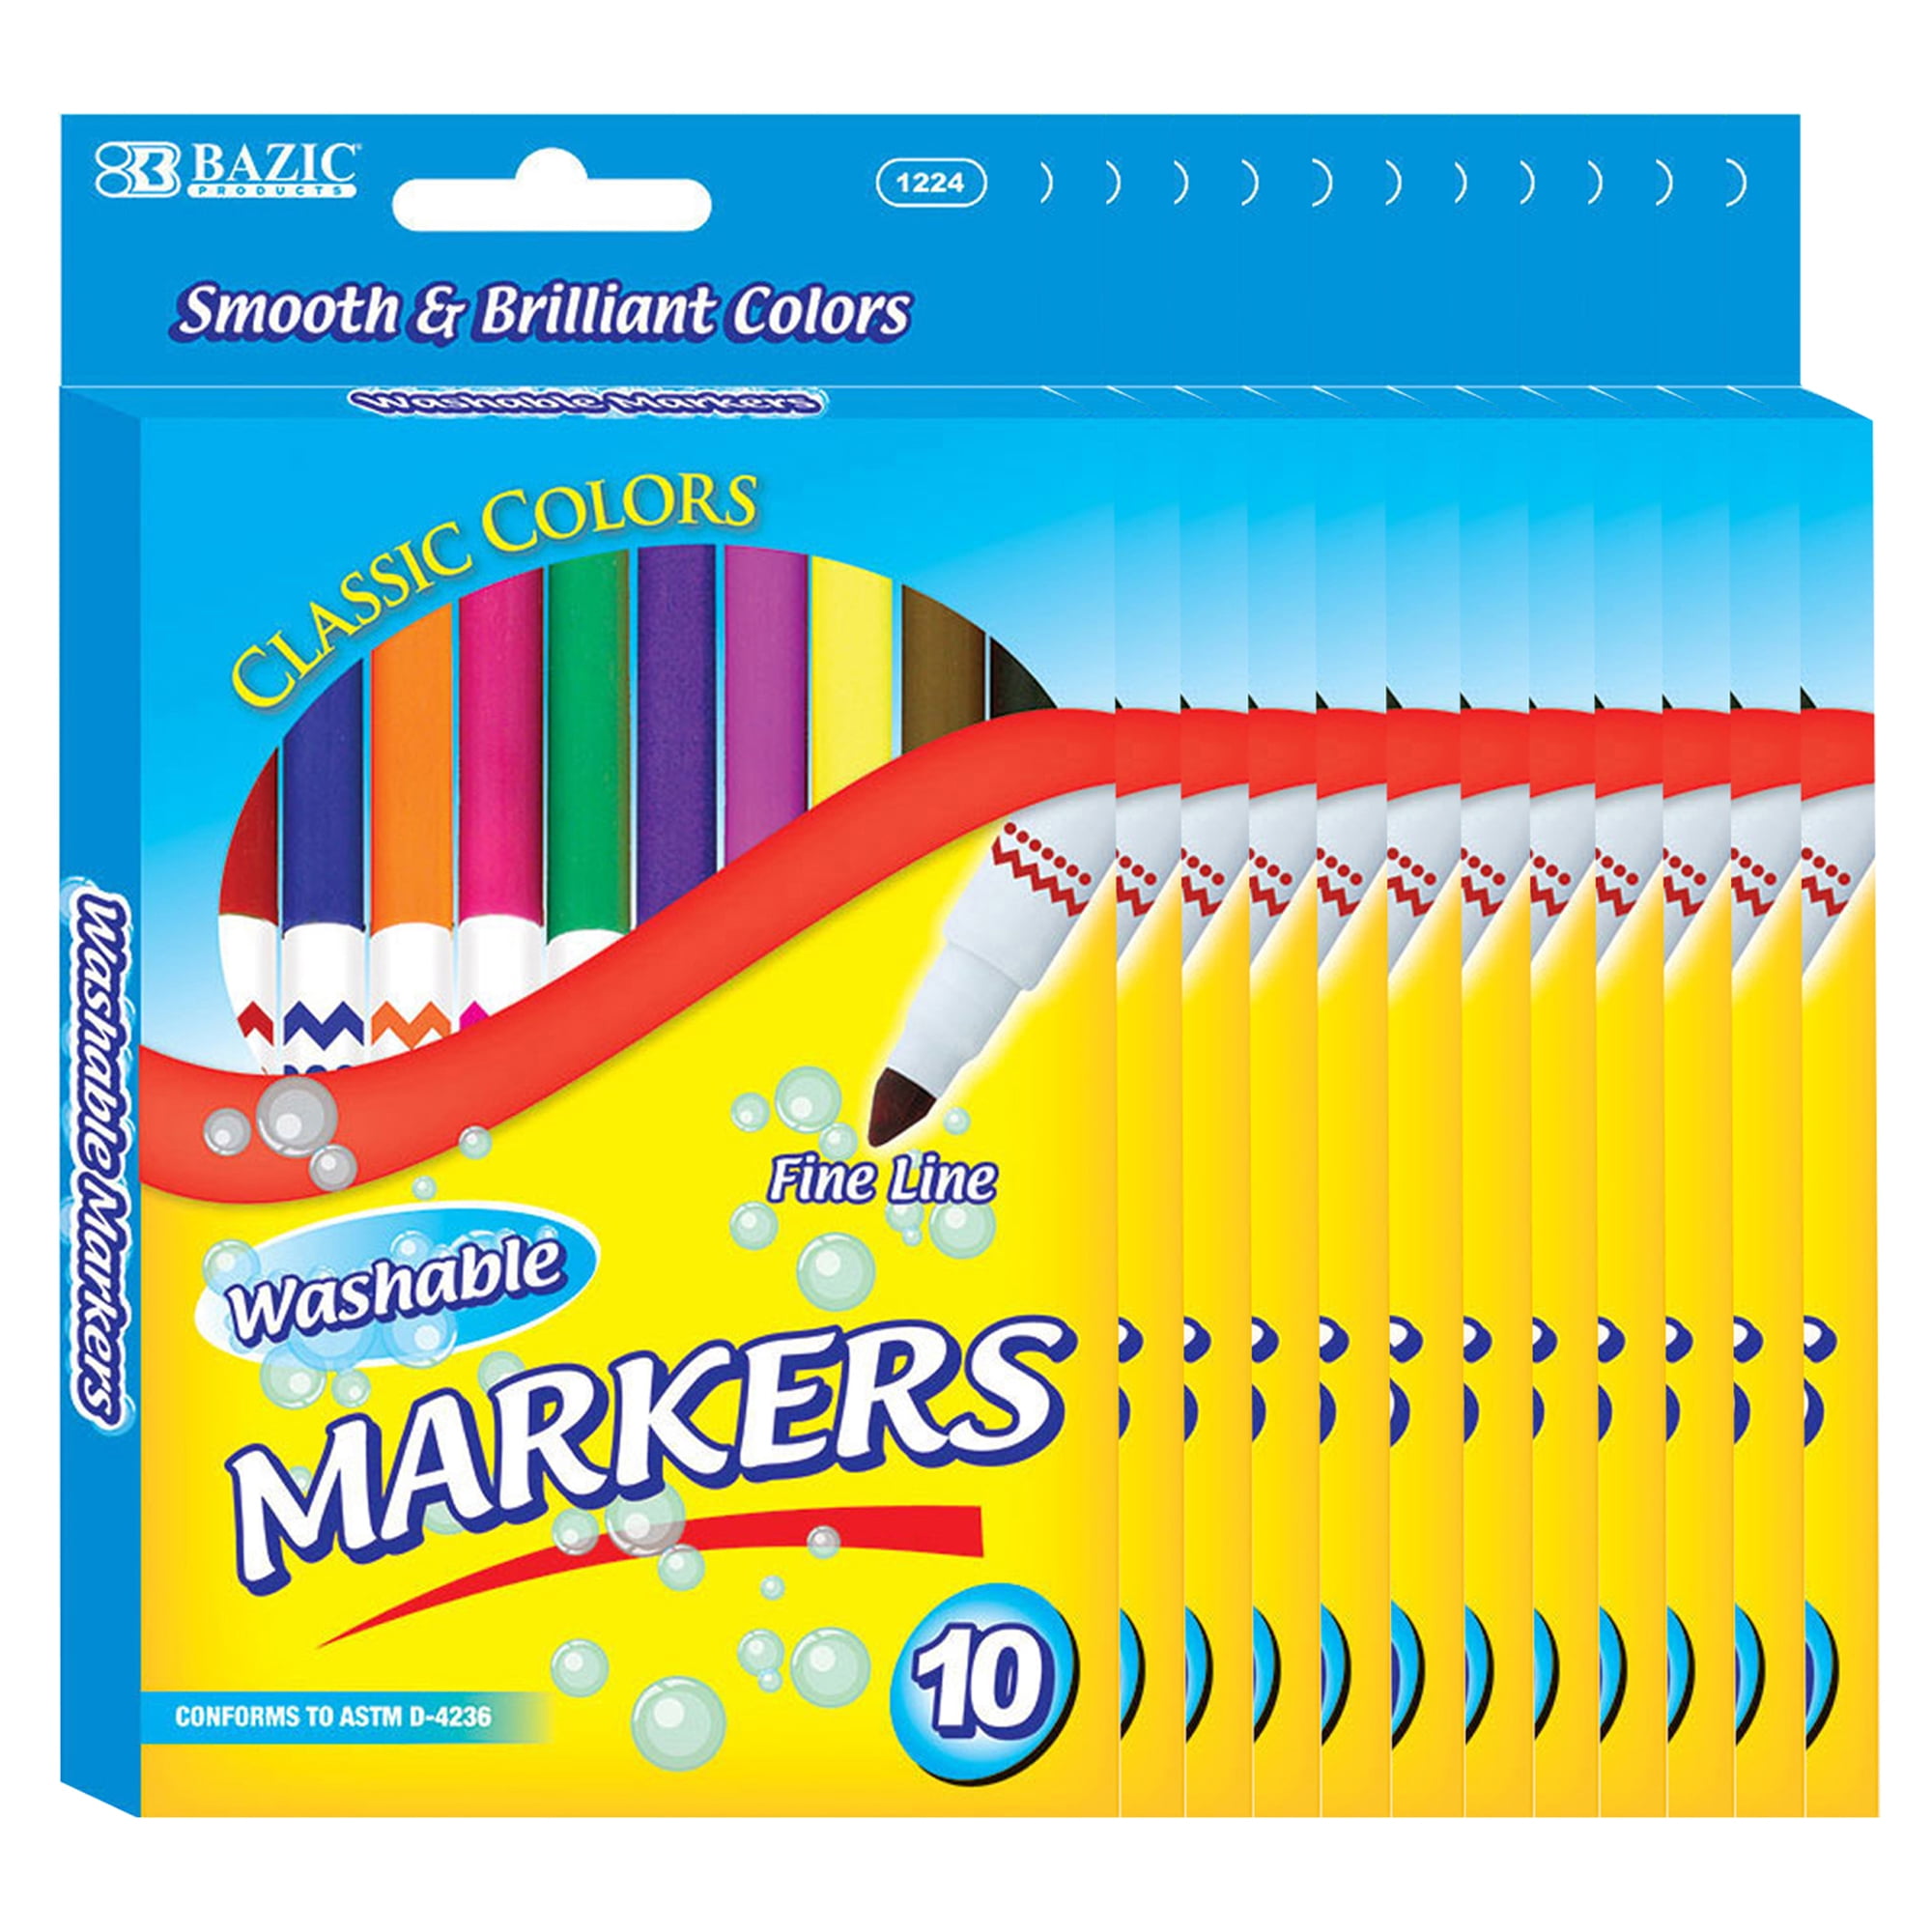 colors vary BAZIC Assorted Color 45 Millimeter Bingo Marker